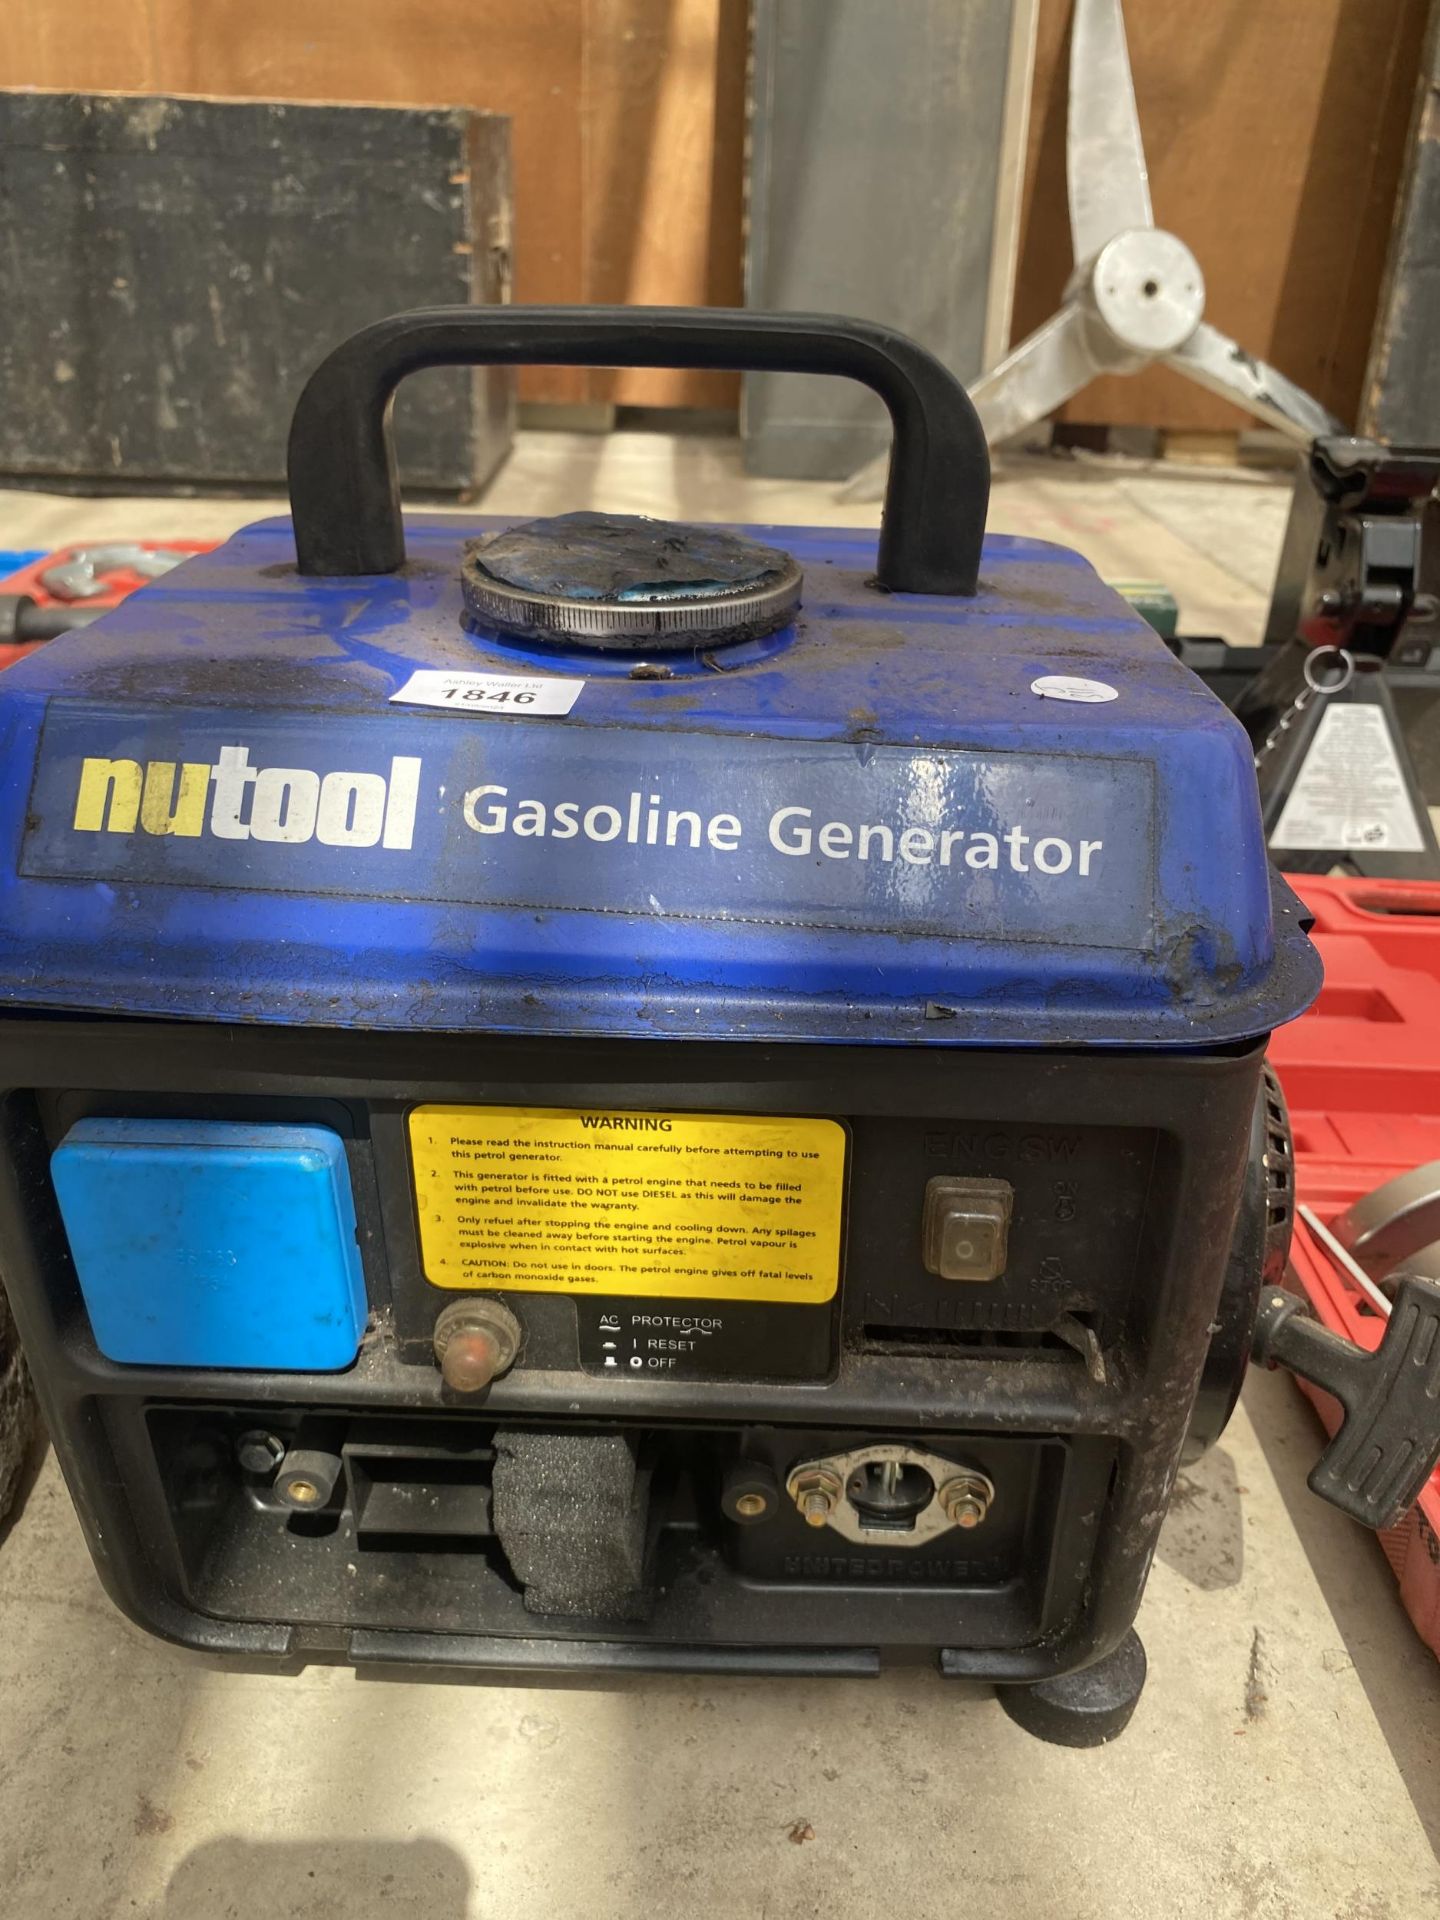 A NUTOOL COMPACT GASOLINE GENERATOR - Image 2 of 2